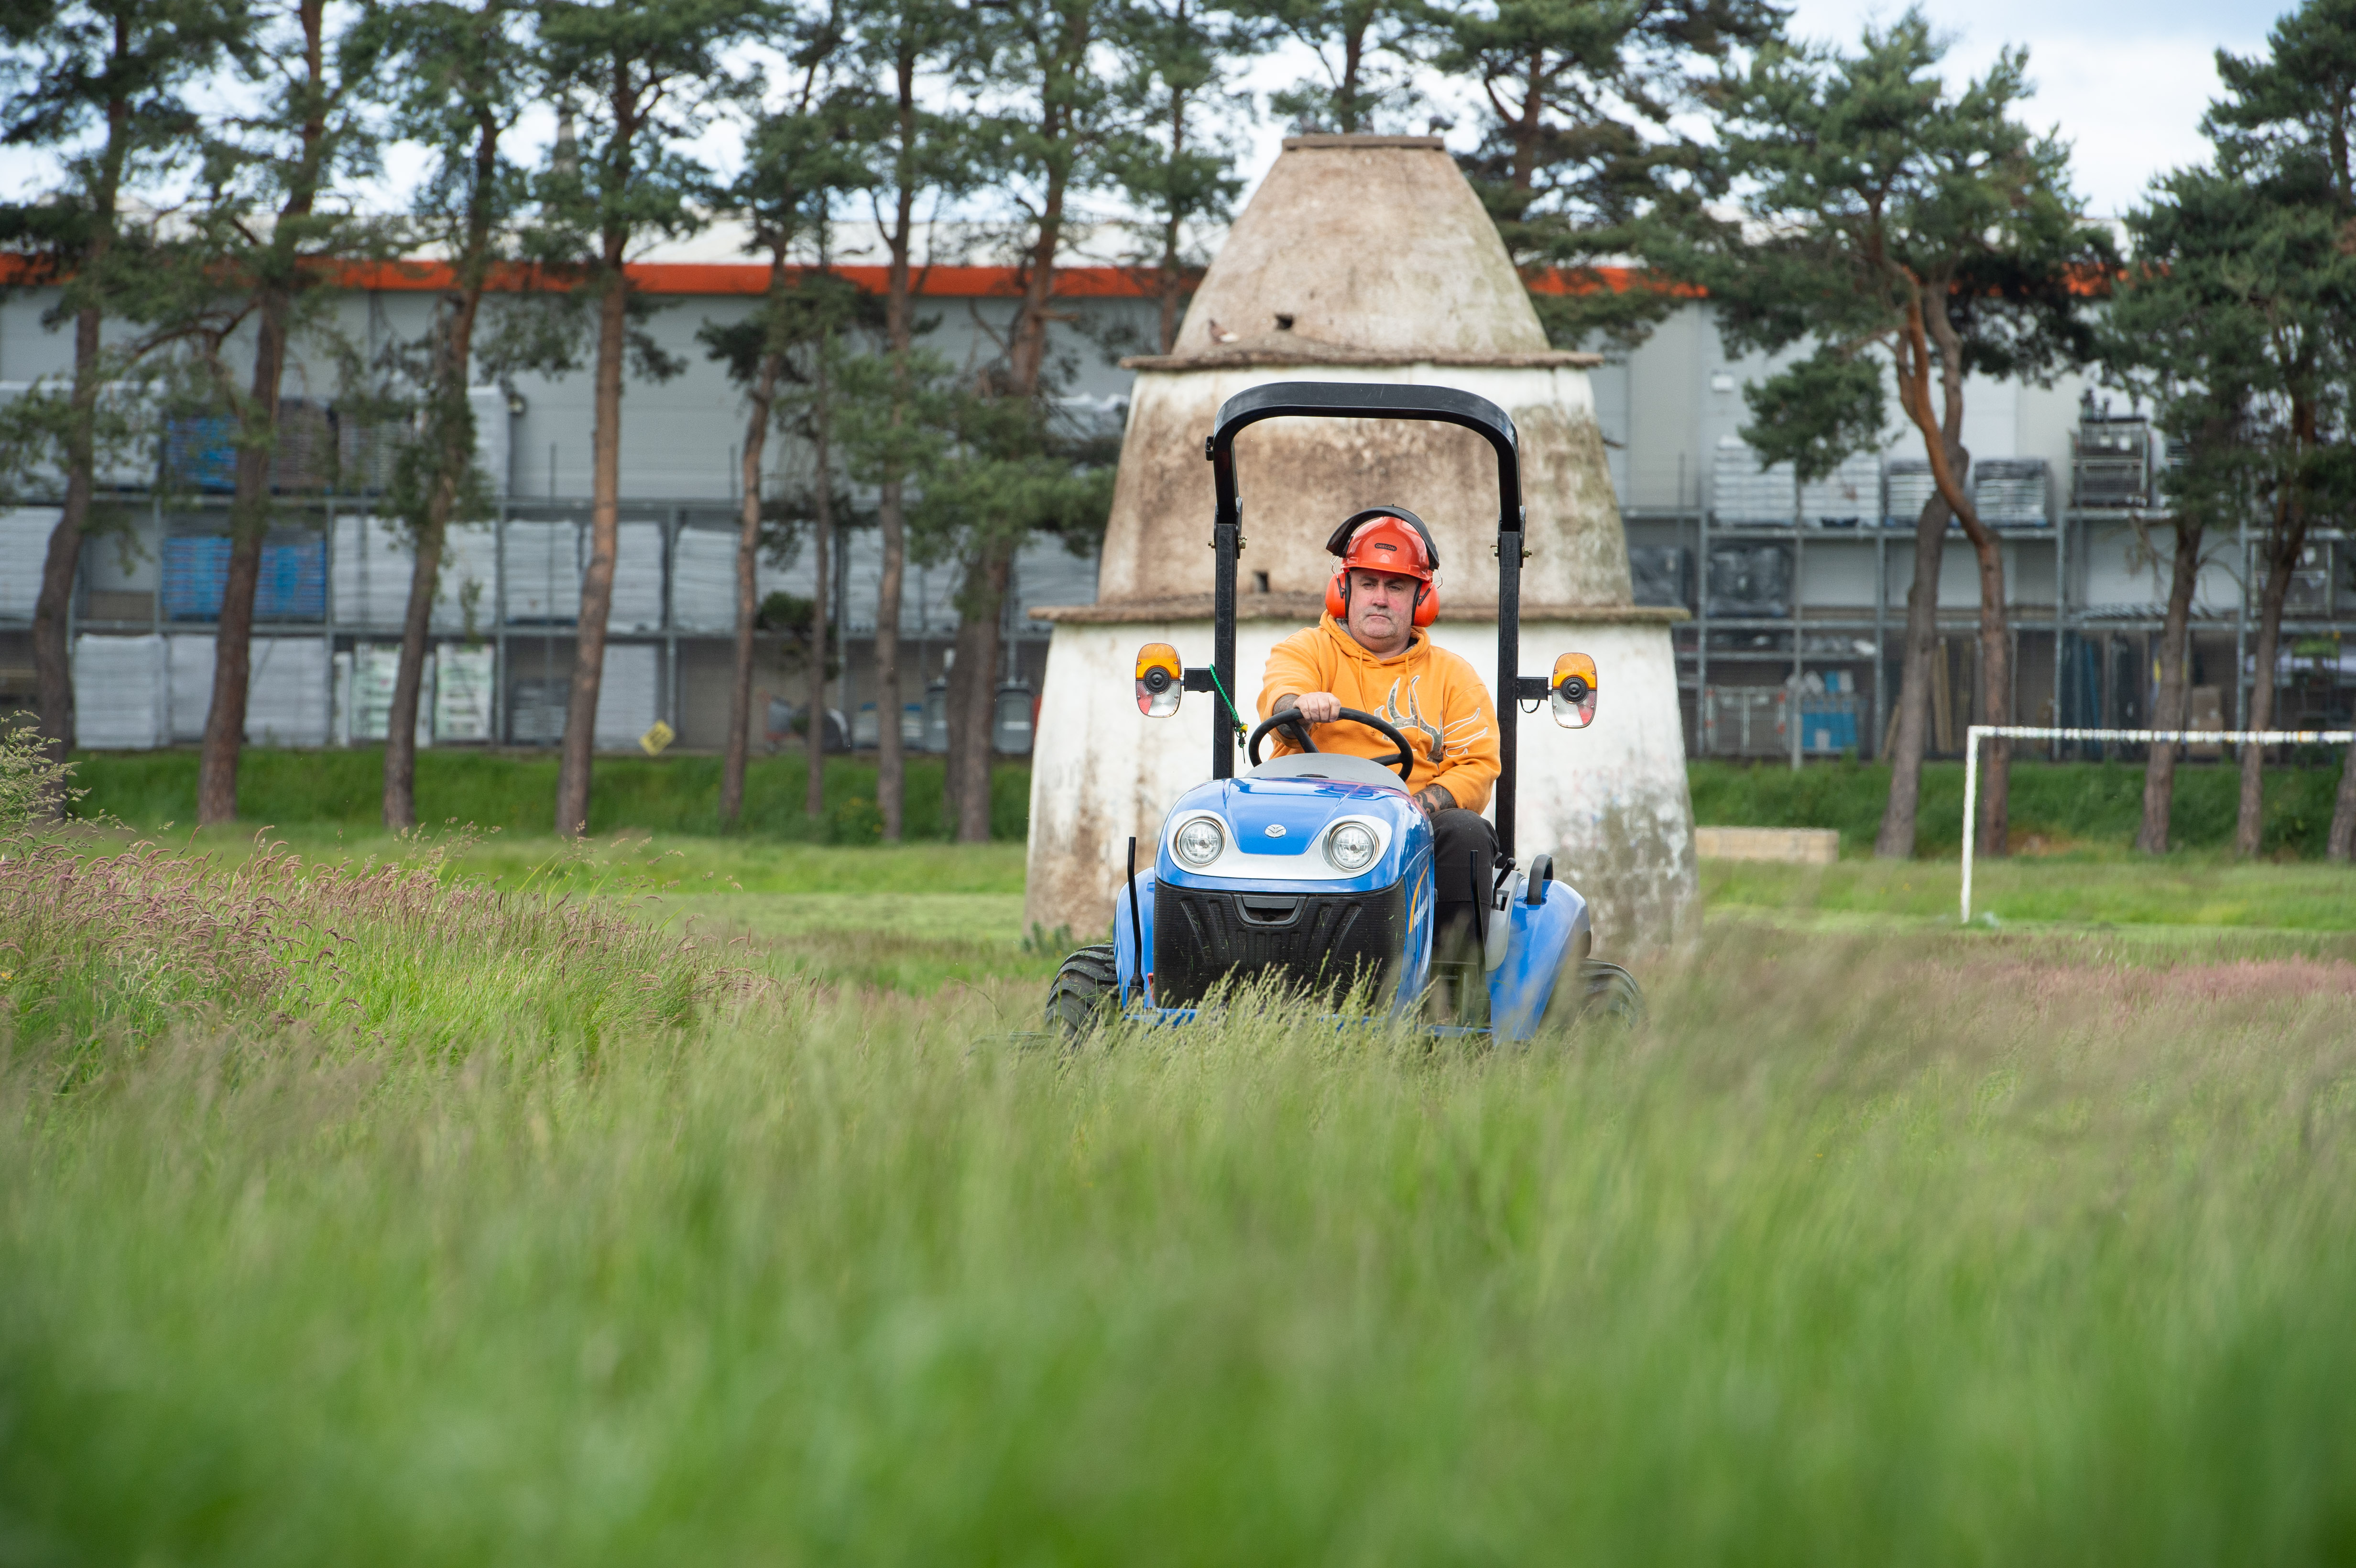 A grass cutter is pictured at Doocot Park in New Elgin.